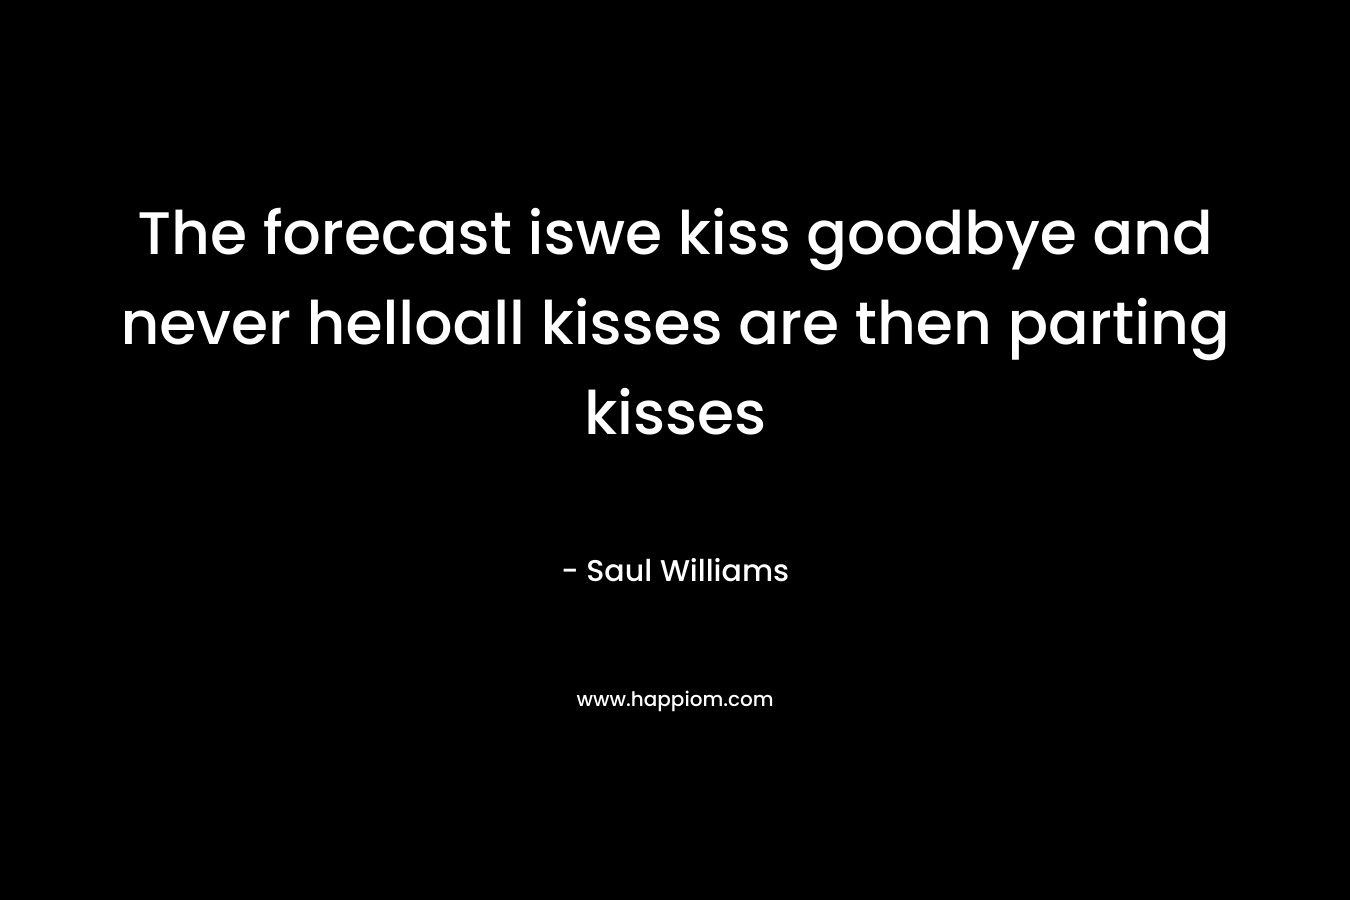 The forecast iswe kiss goodbye and never helloall kisses are then parting kisses – Saul Williams